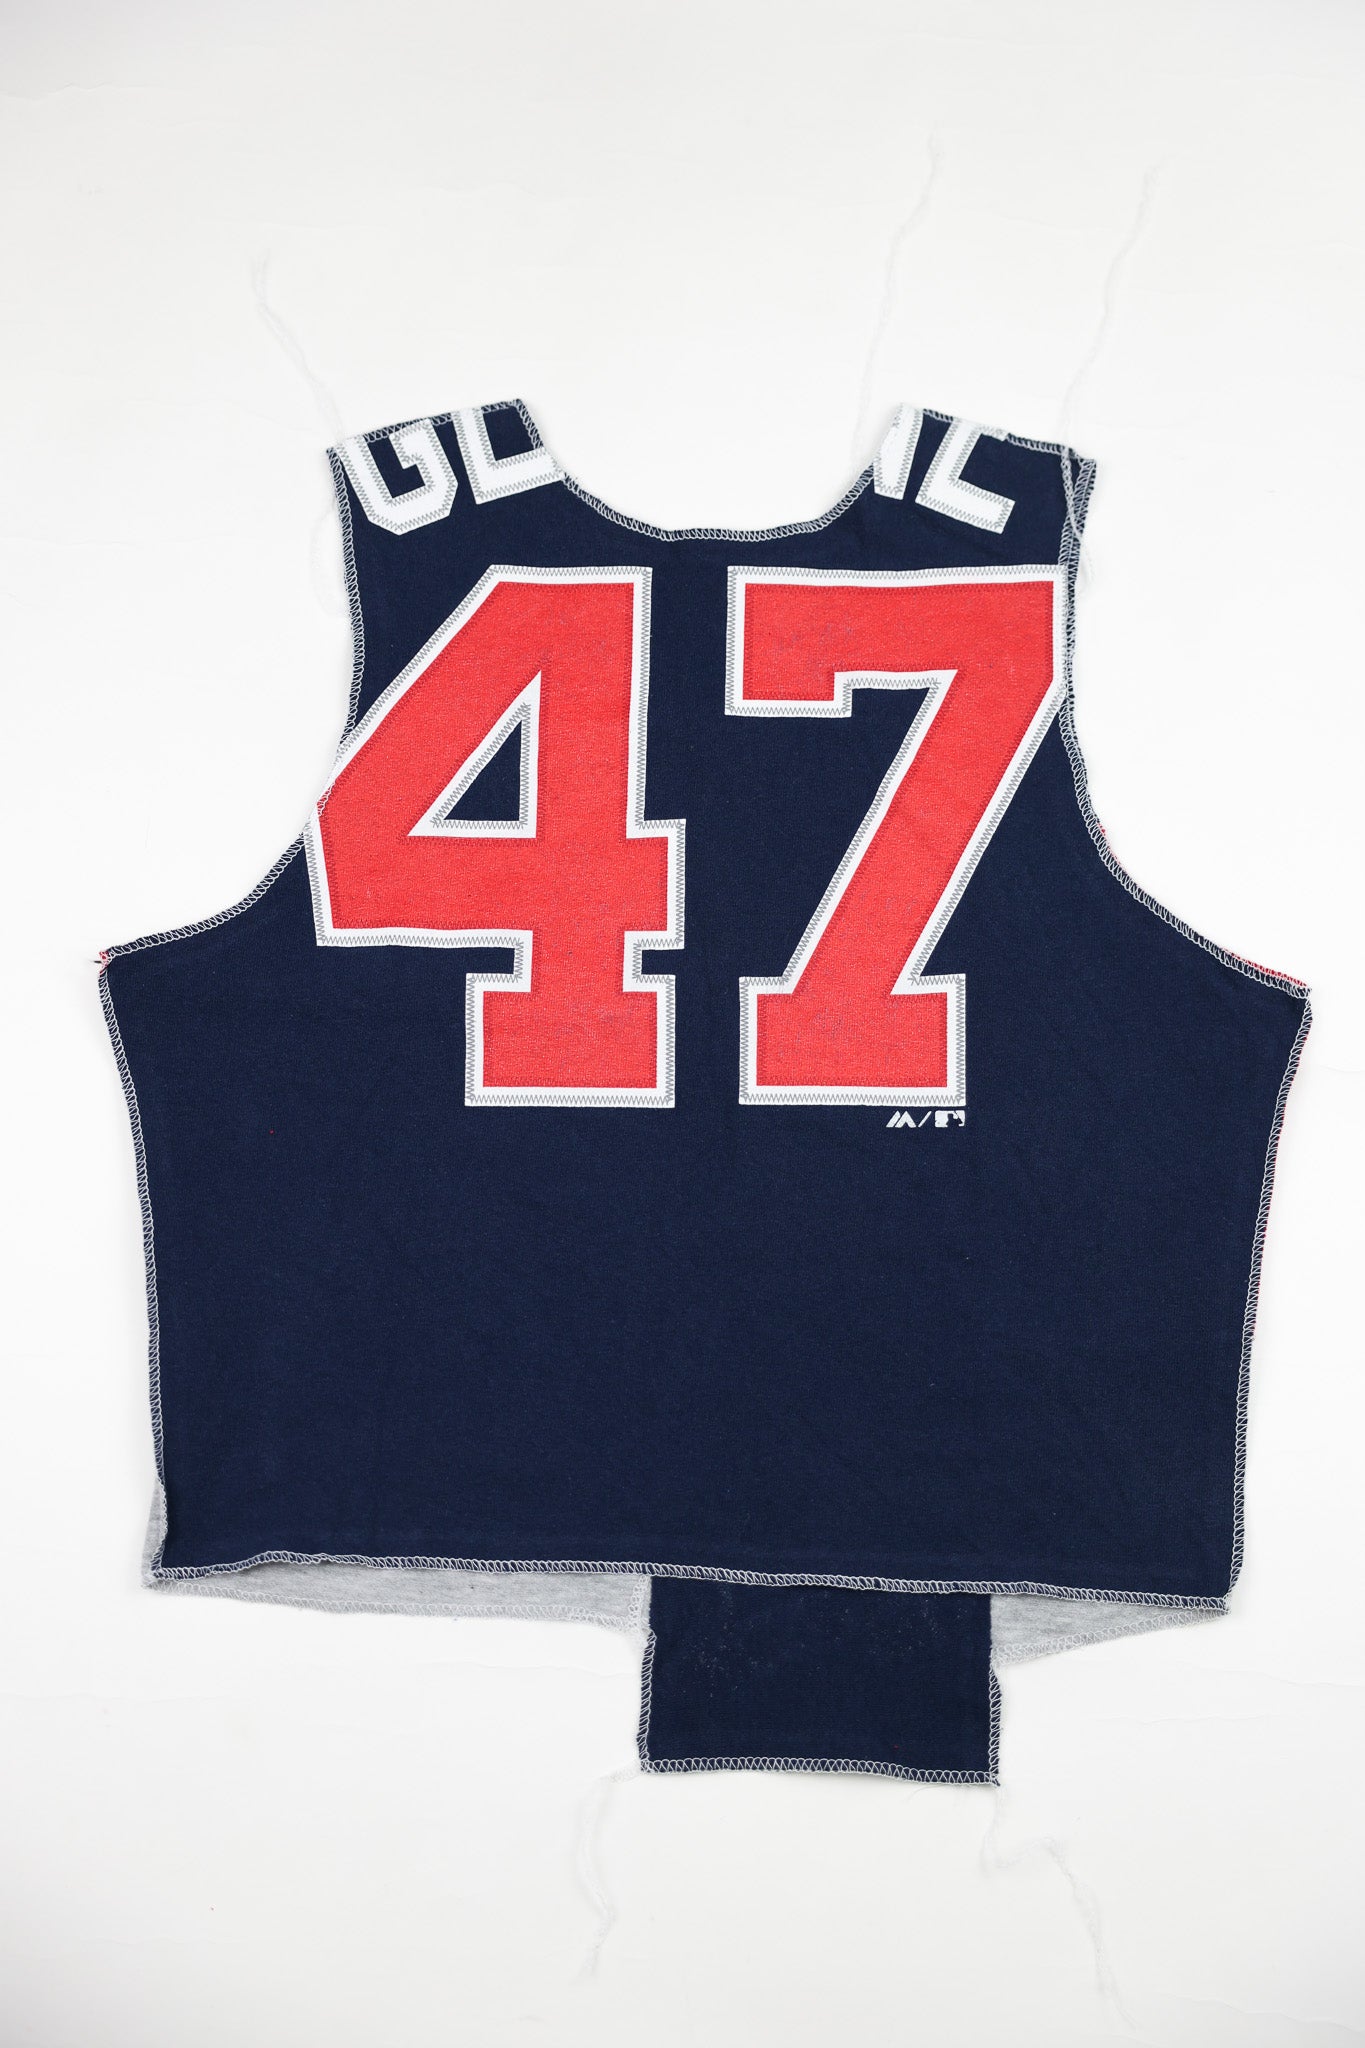 Upcycled Braves Baby Tee - Tonguetied Apparel